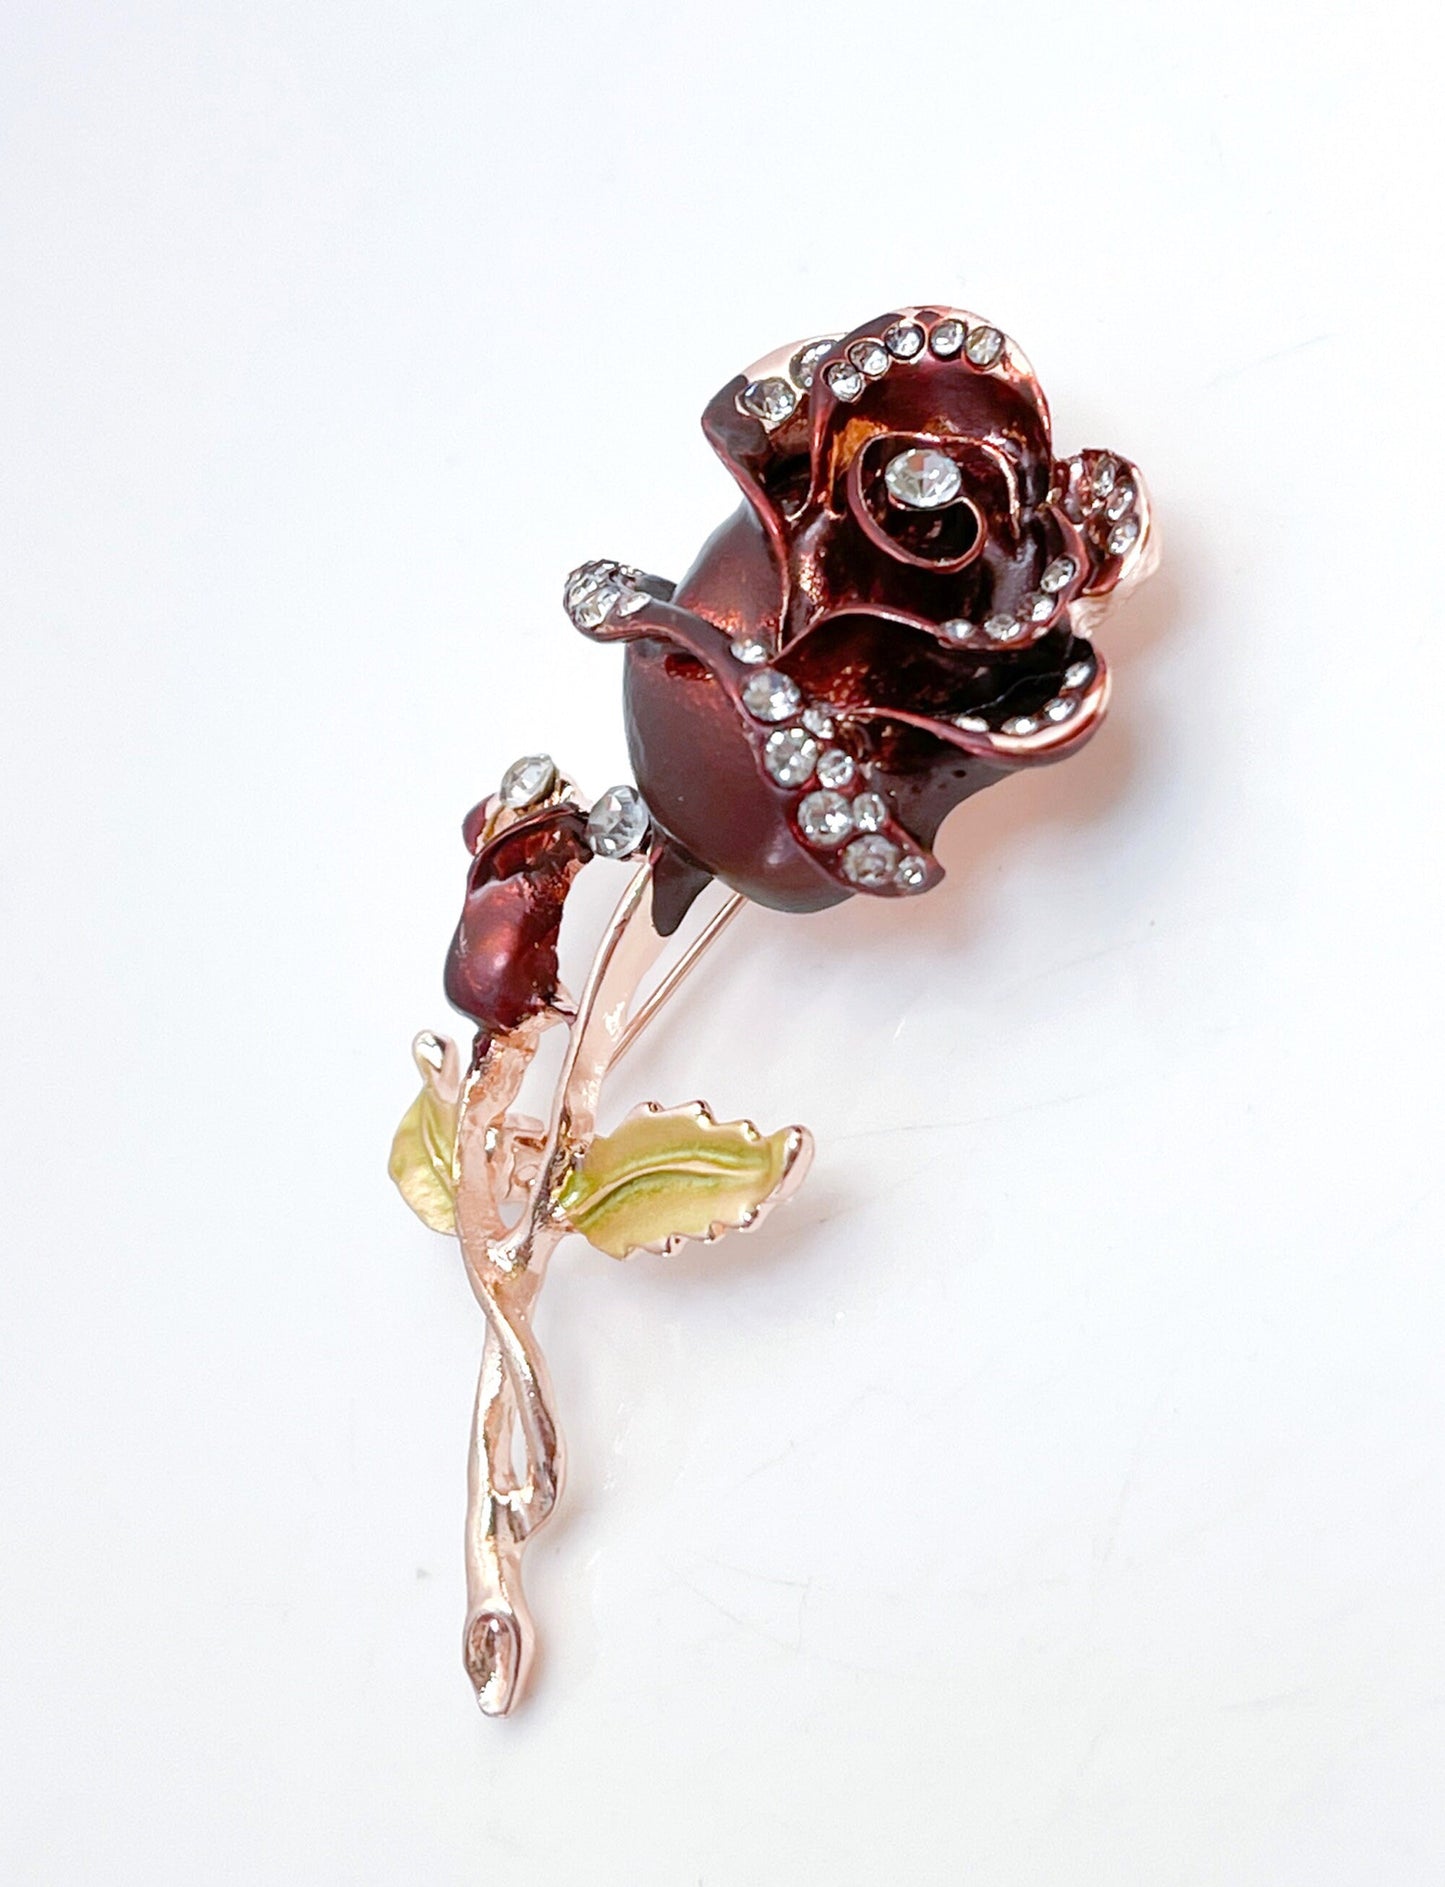 Vintage Single Rose Brooch | Wine Gold Rose Pin with Crystals